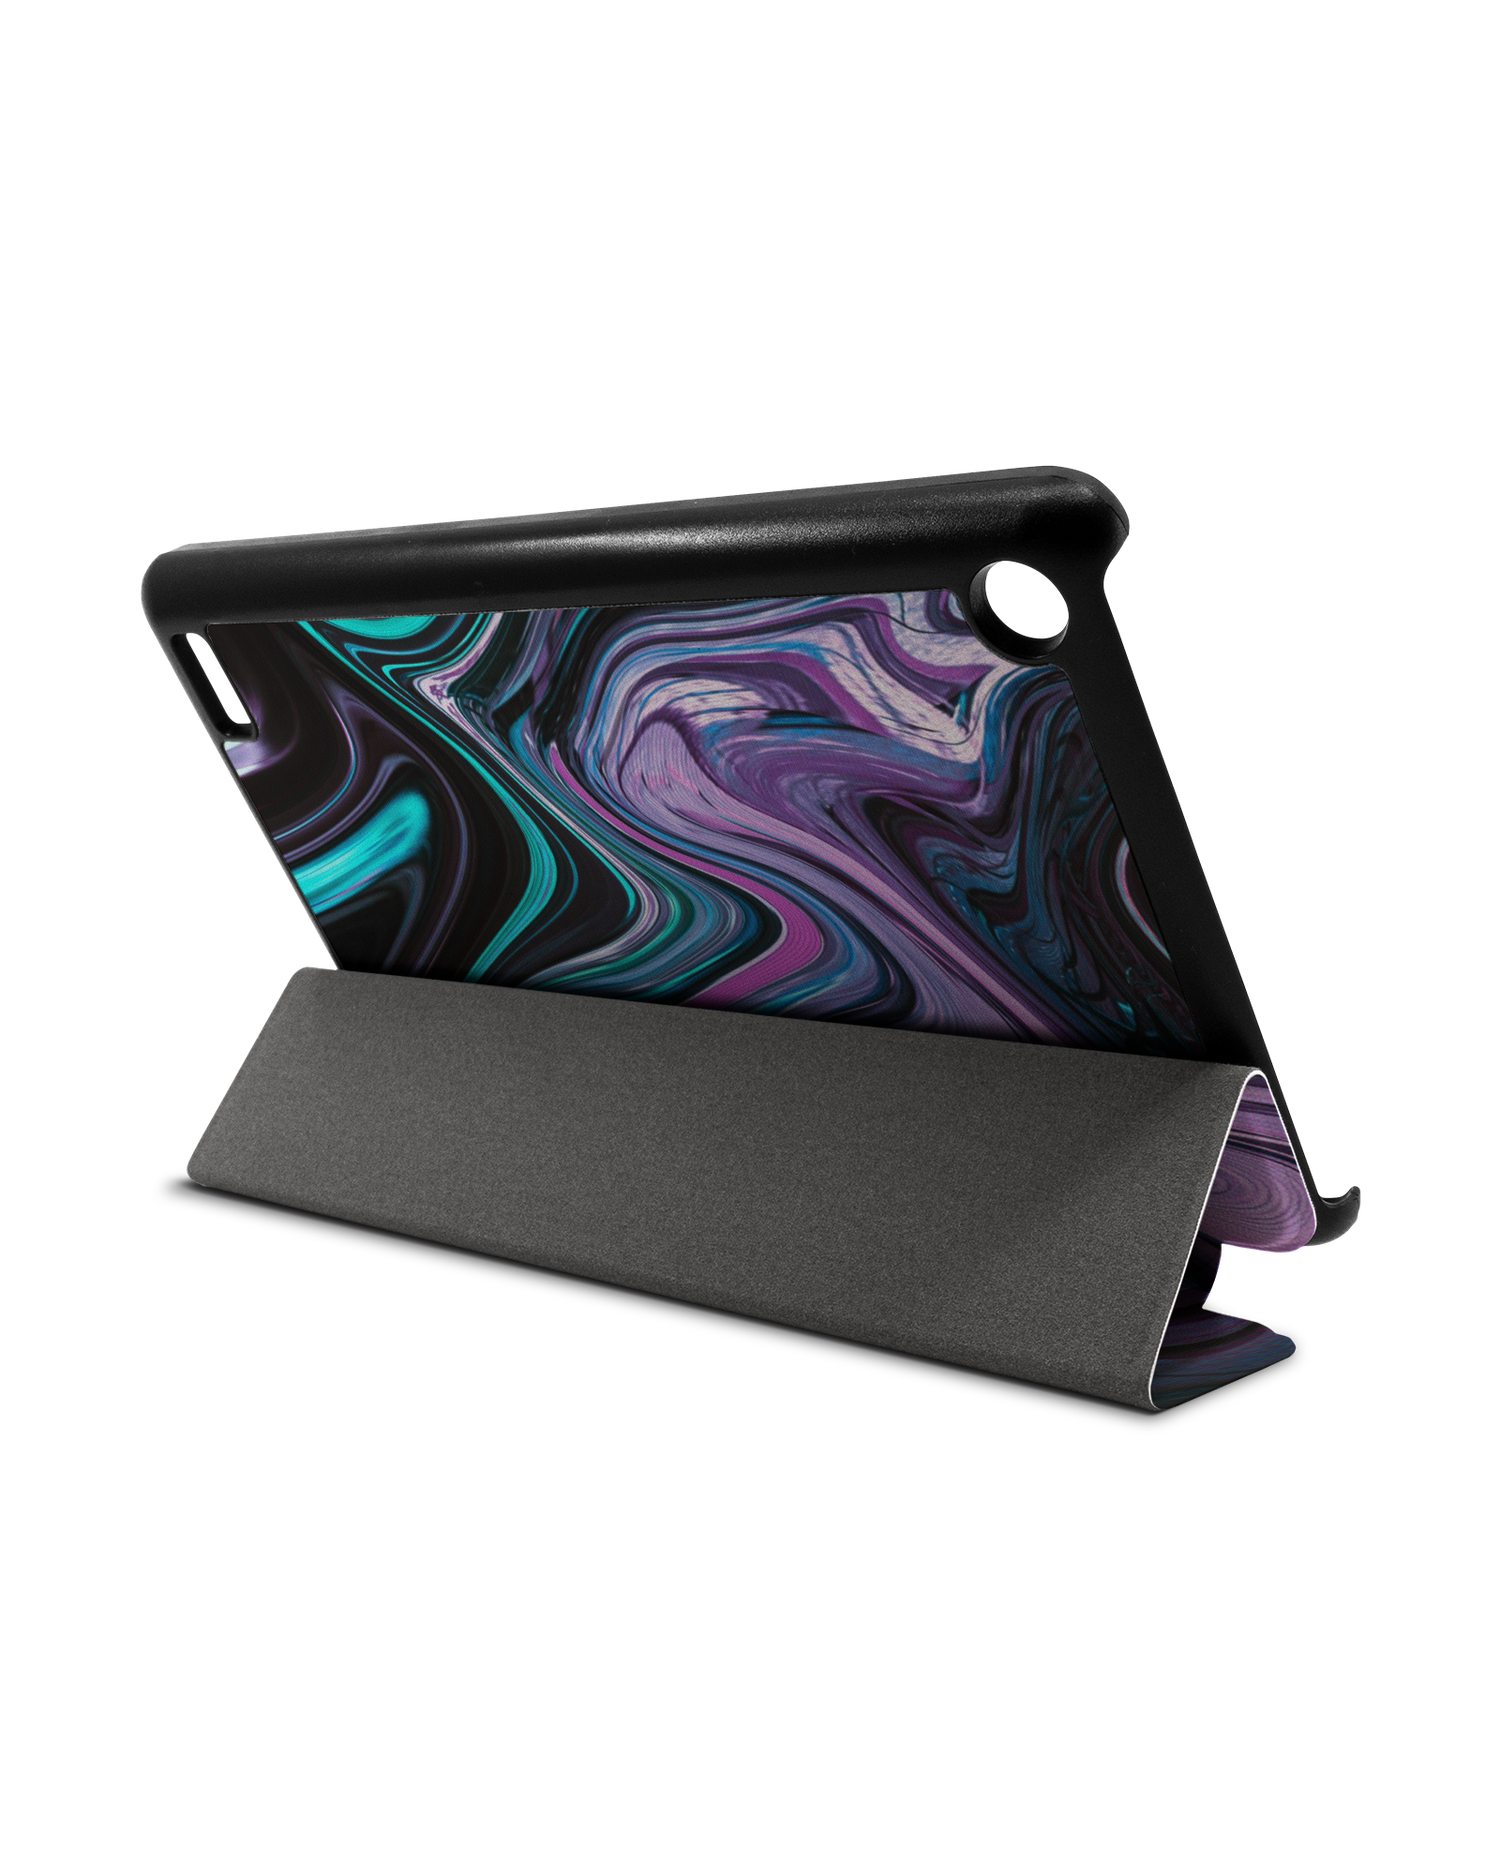 Digital Swirl Tablet Smart Case for Amazon Fire 7: Used as Stand